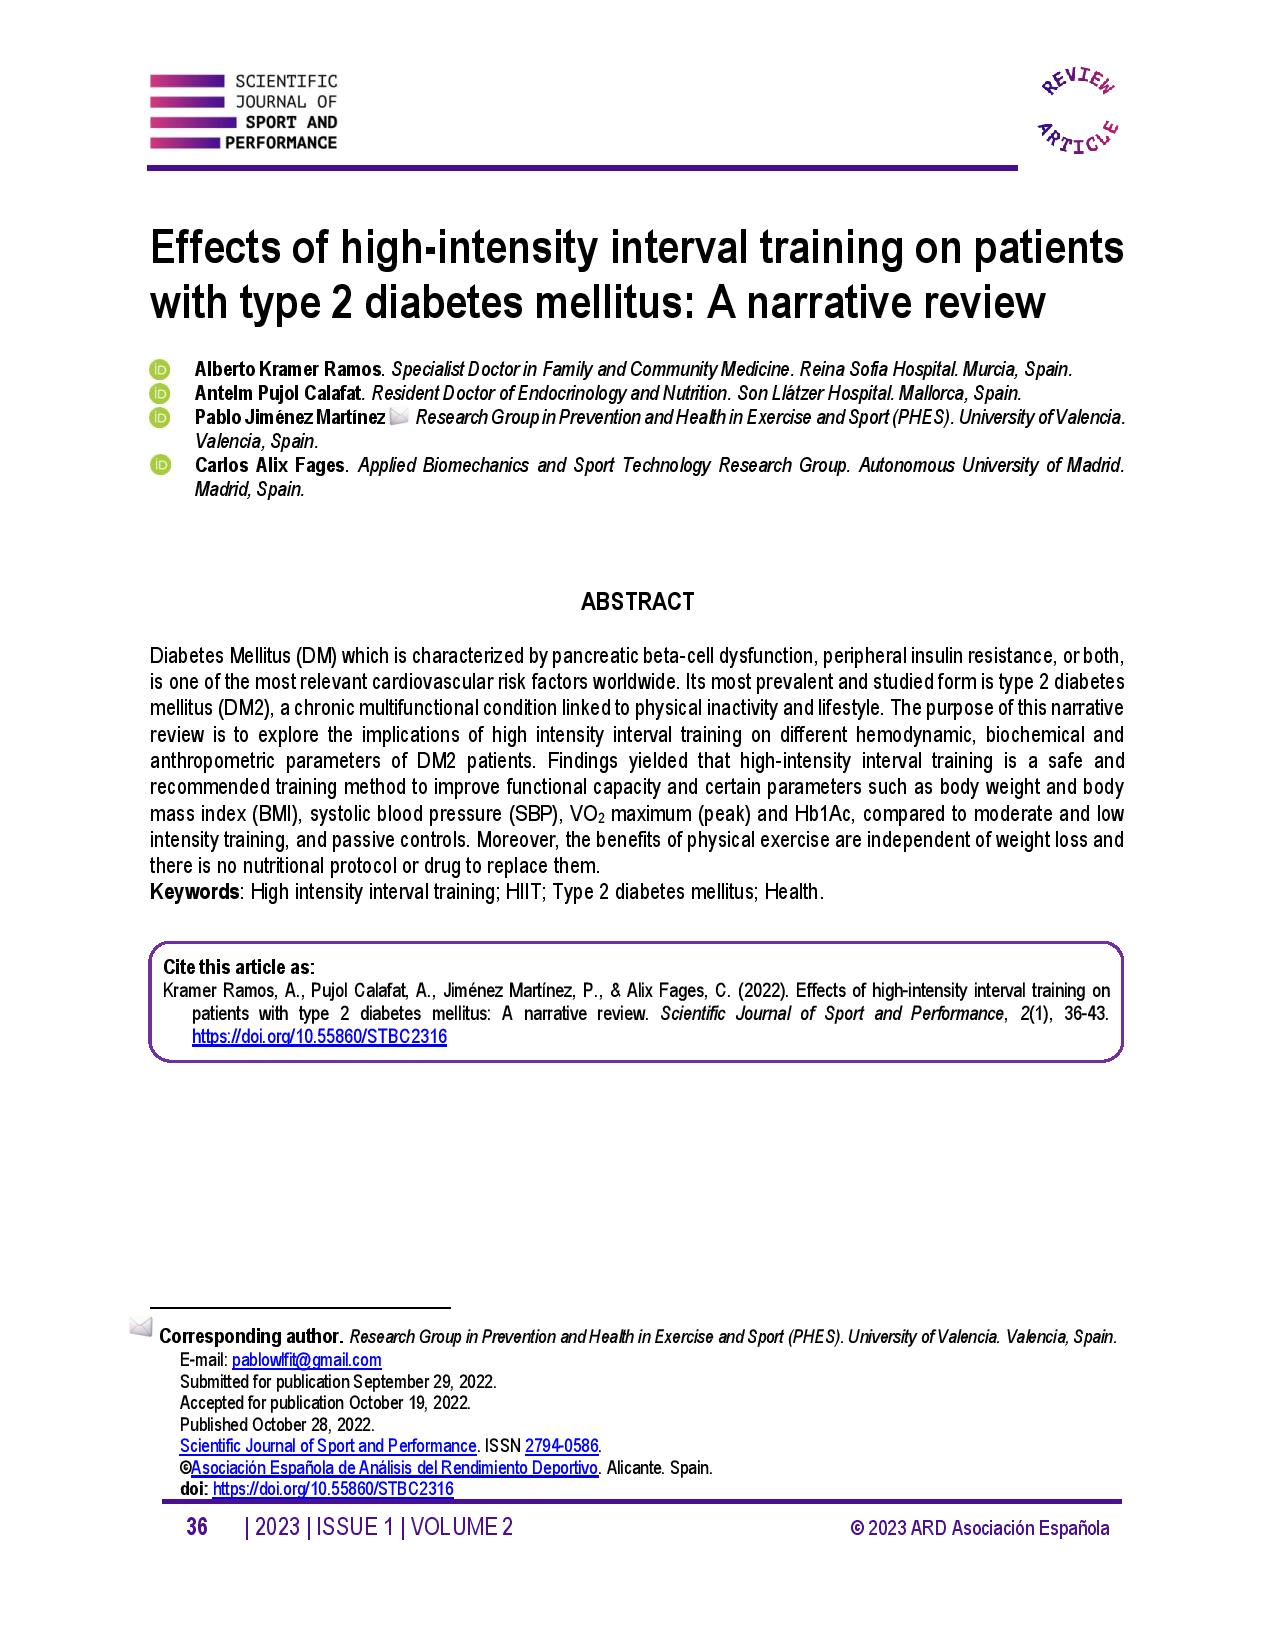 Effects of high-intensity interval training on patients with type 2 diabetes mellitus: A narrative review